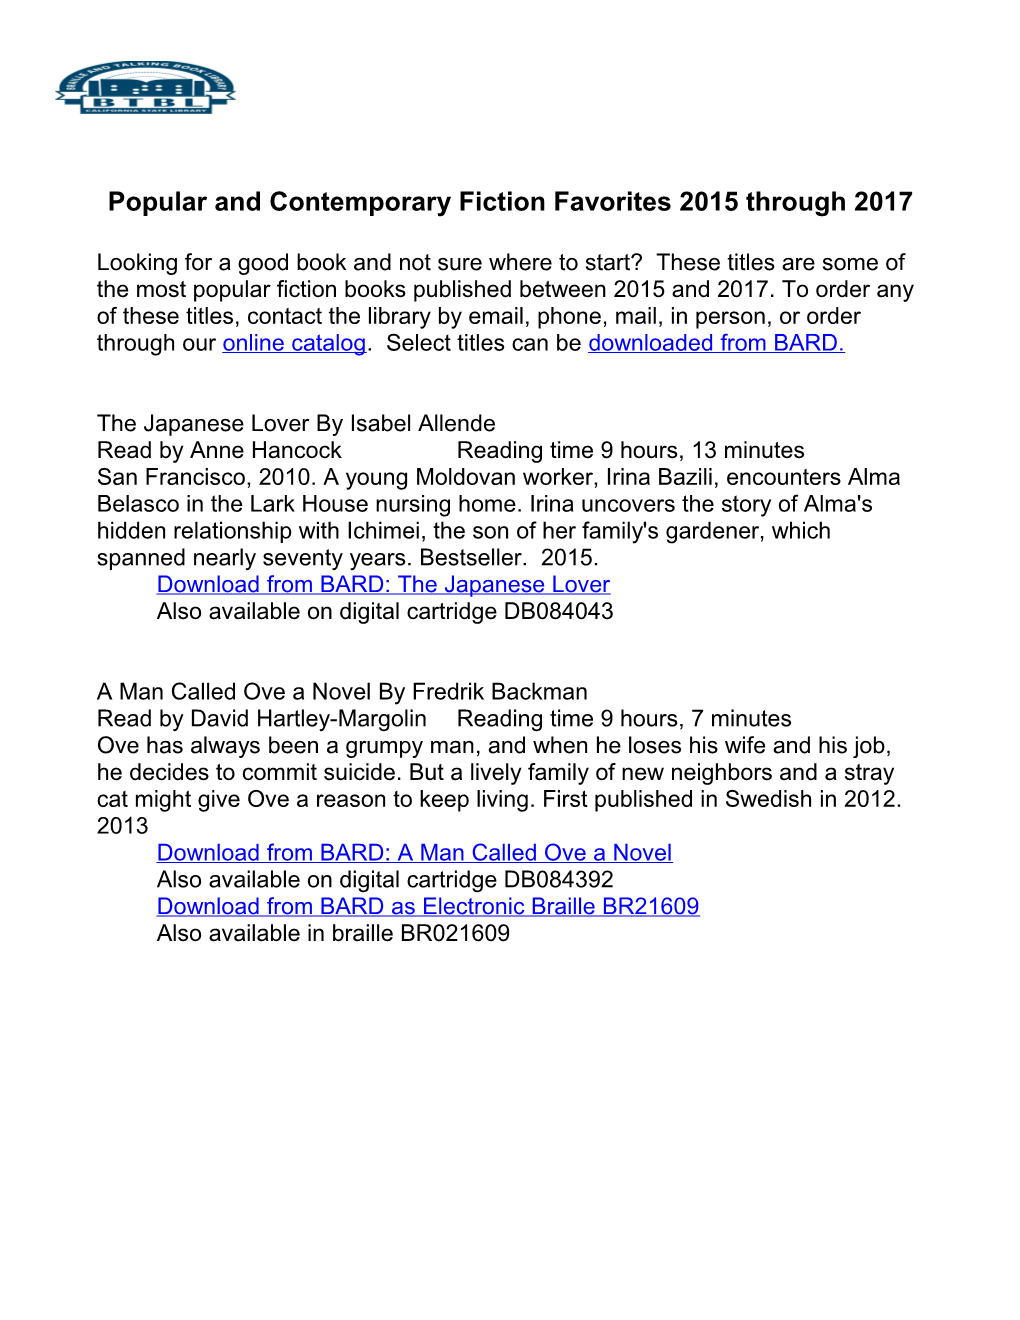 Popular and Contemporary Fiction Favorites 2015-2017